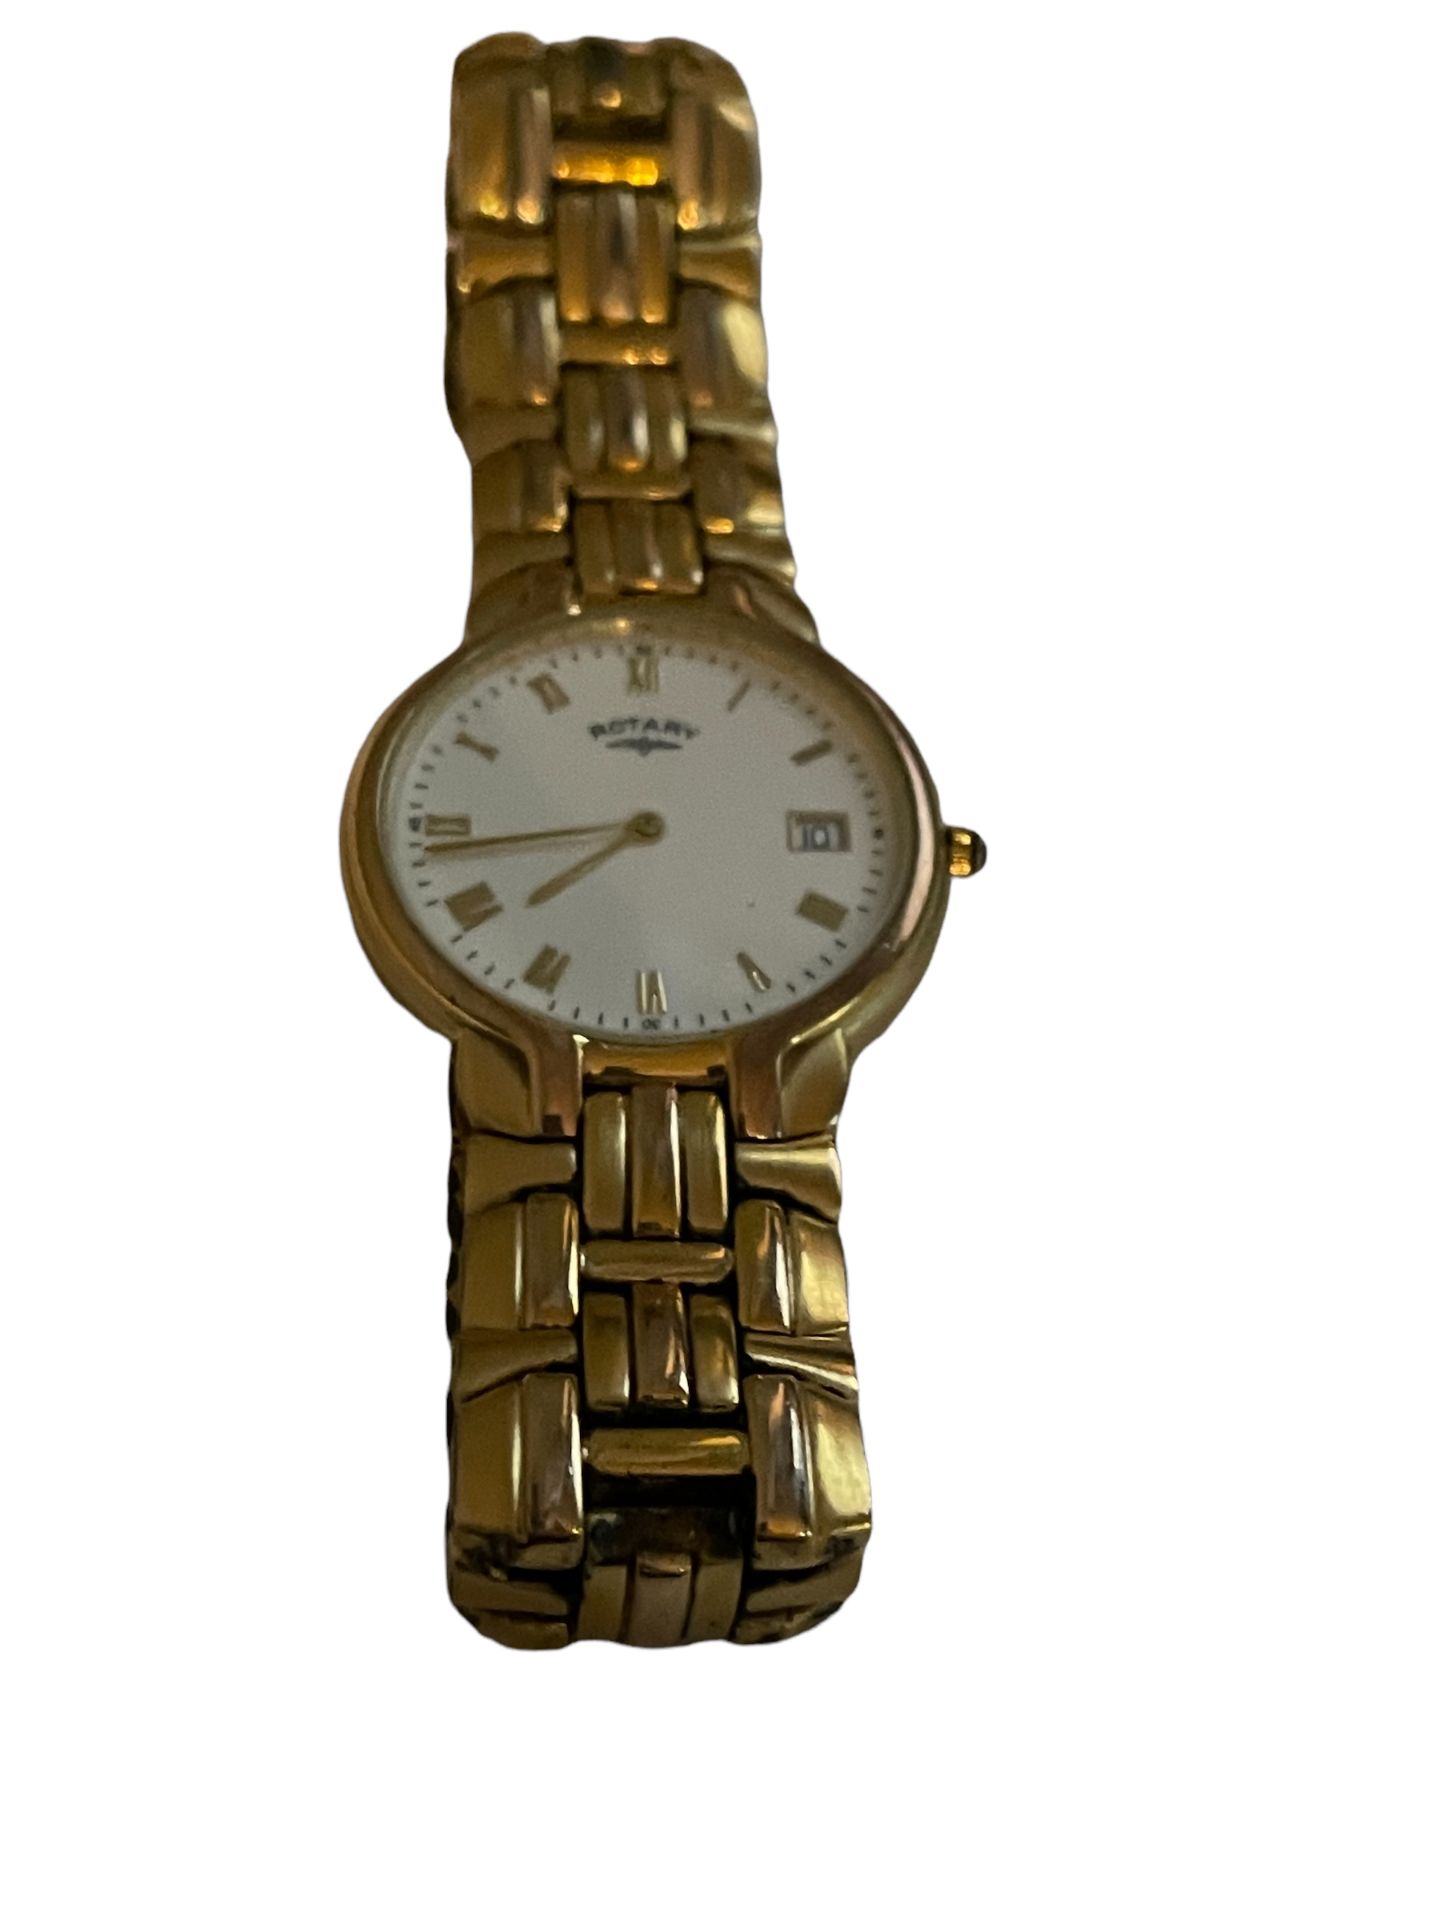 Mens Rotary Gold Plated Watch - Return Stock from our Private Jet Charter - Image 3 of 14